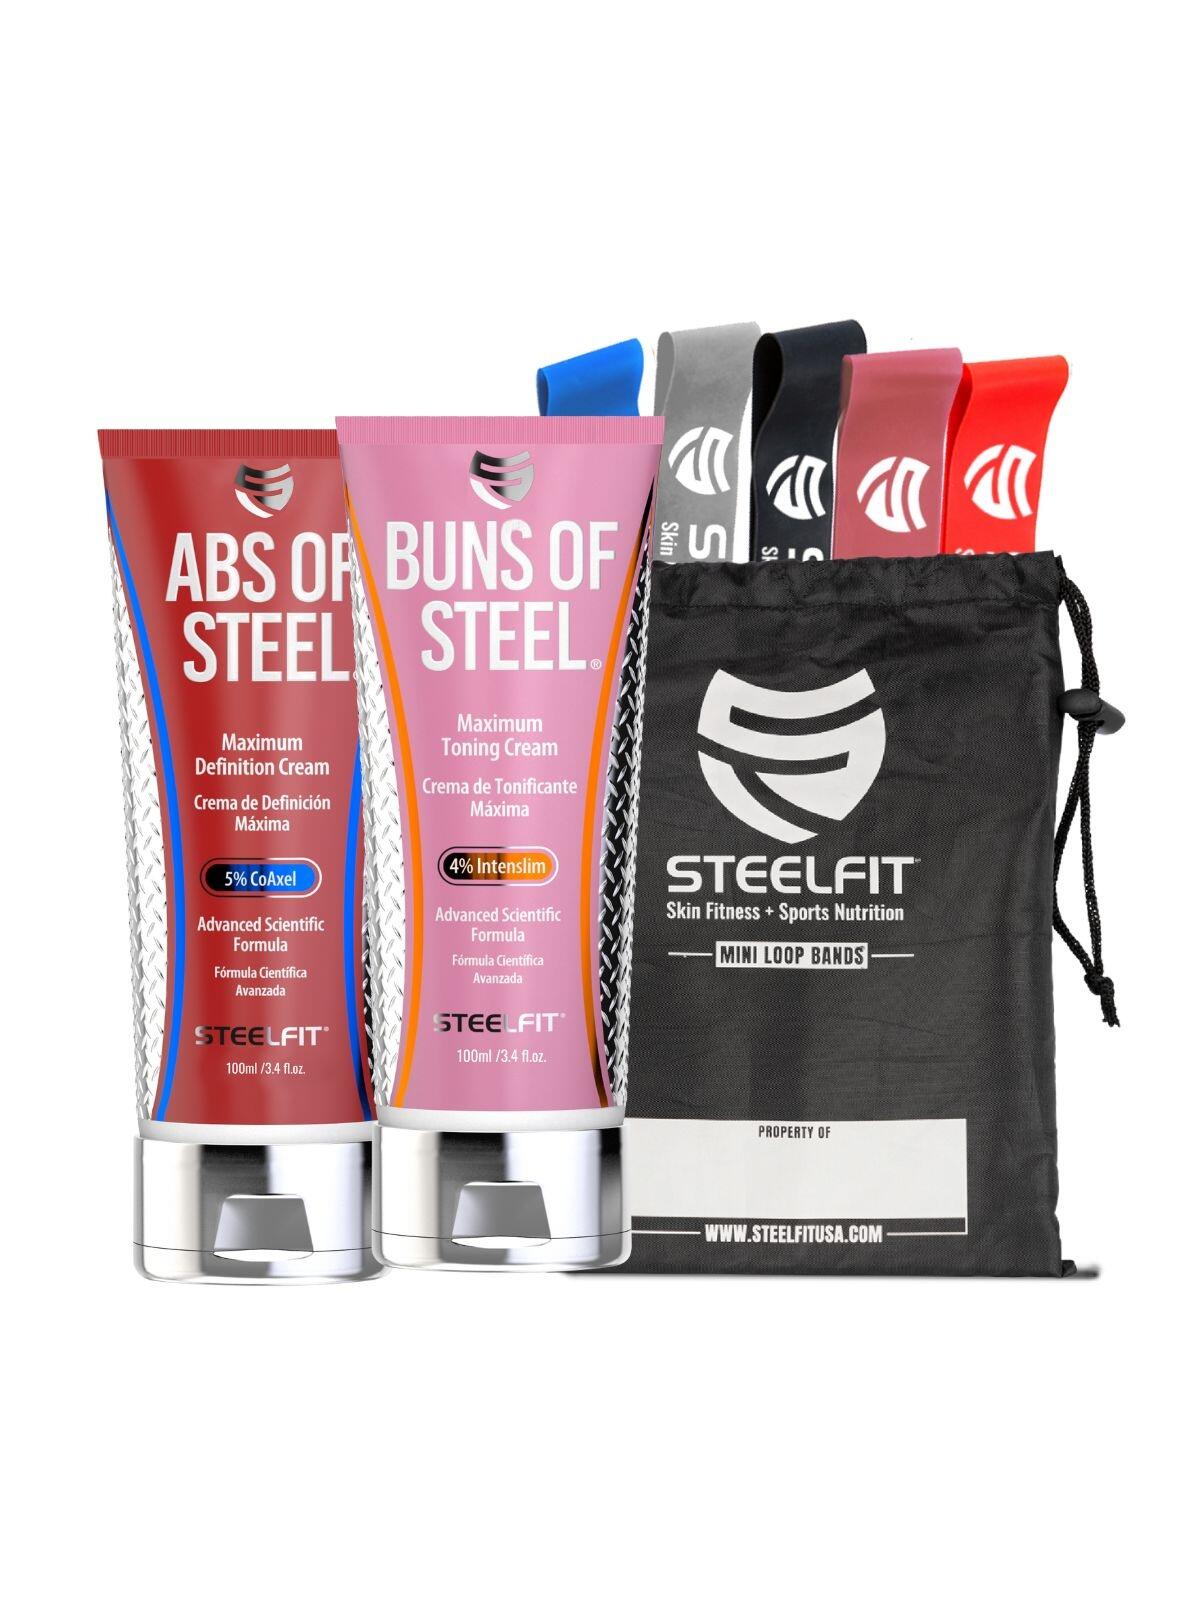 Abs of Steel + Buns of Steel (100ml/un) + Mini Bands